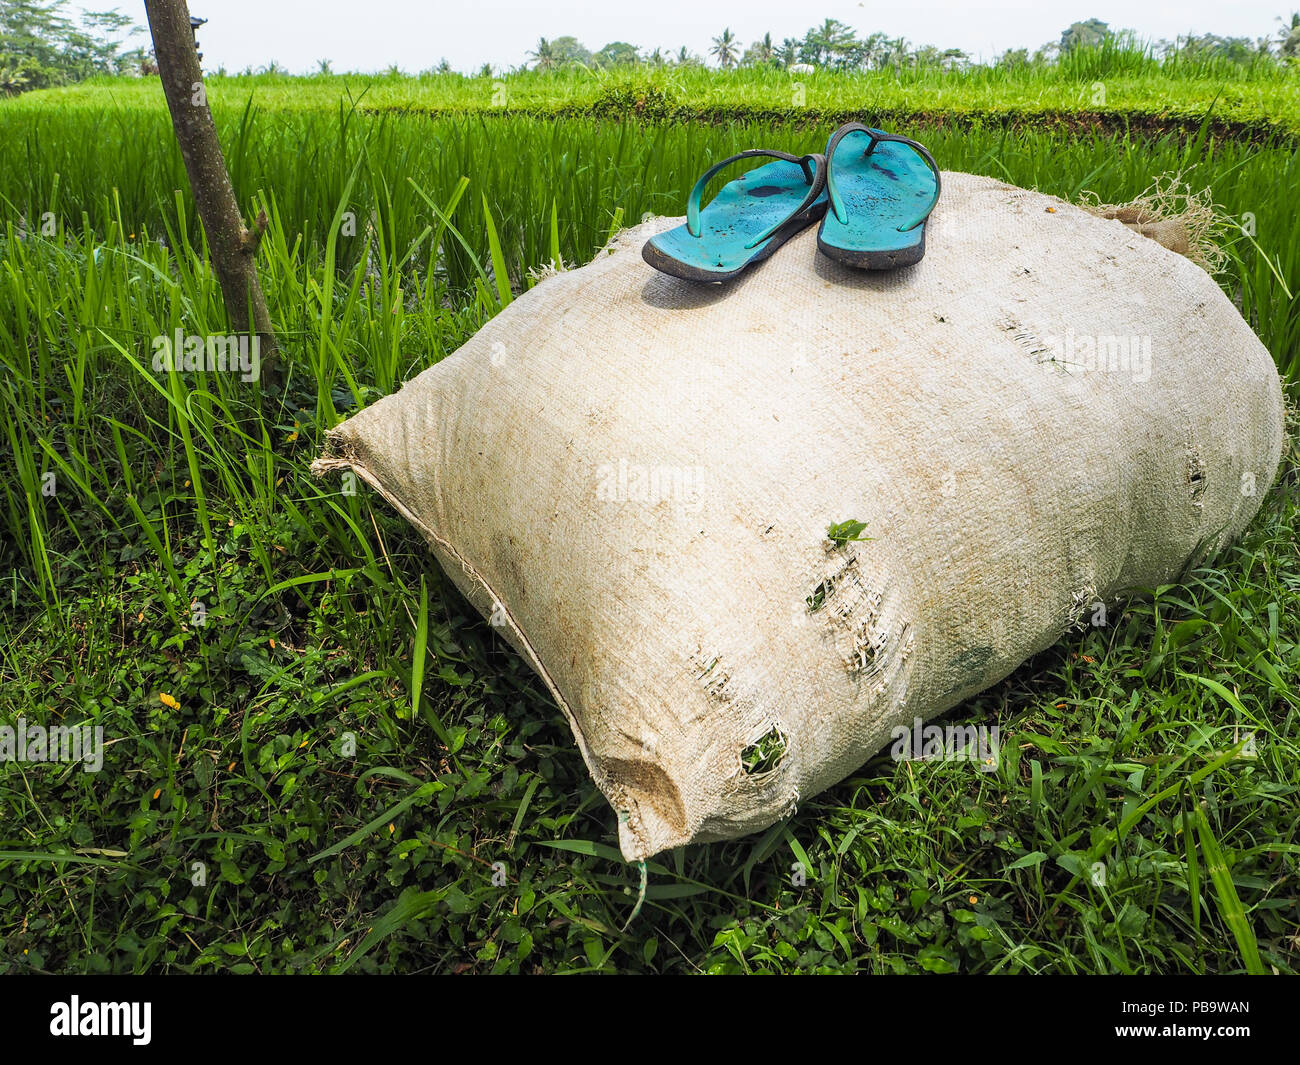 Pair of slippers on top of a bag of rice next to the rice fields in Ubud, Indonesia Stock Photo